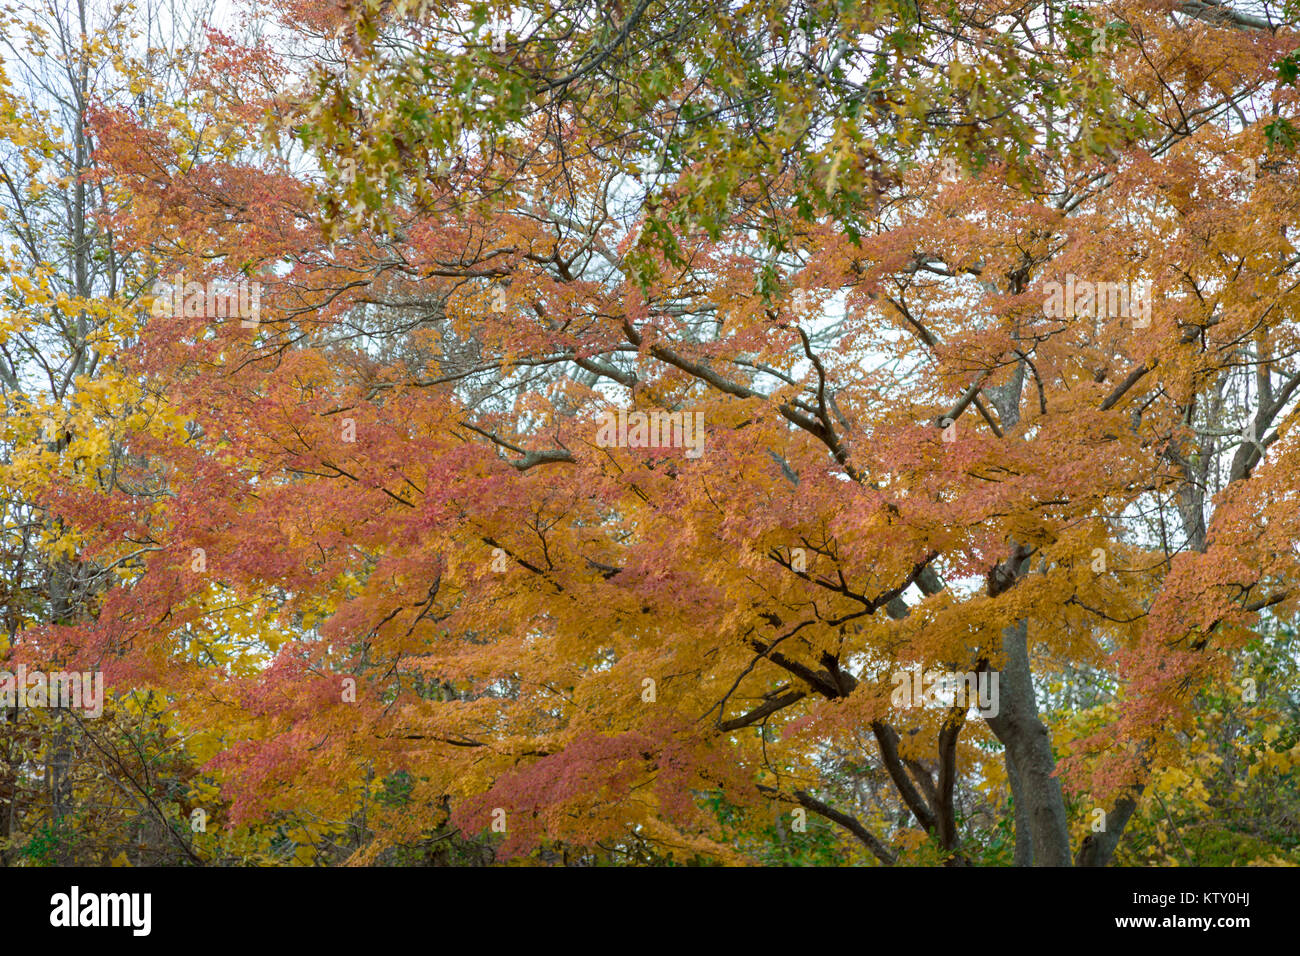 landscape with a beautiful tree in fall colors Stock Photo